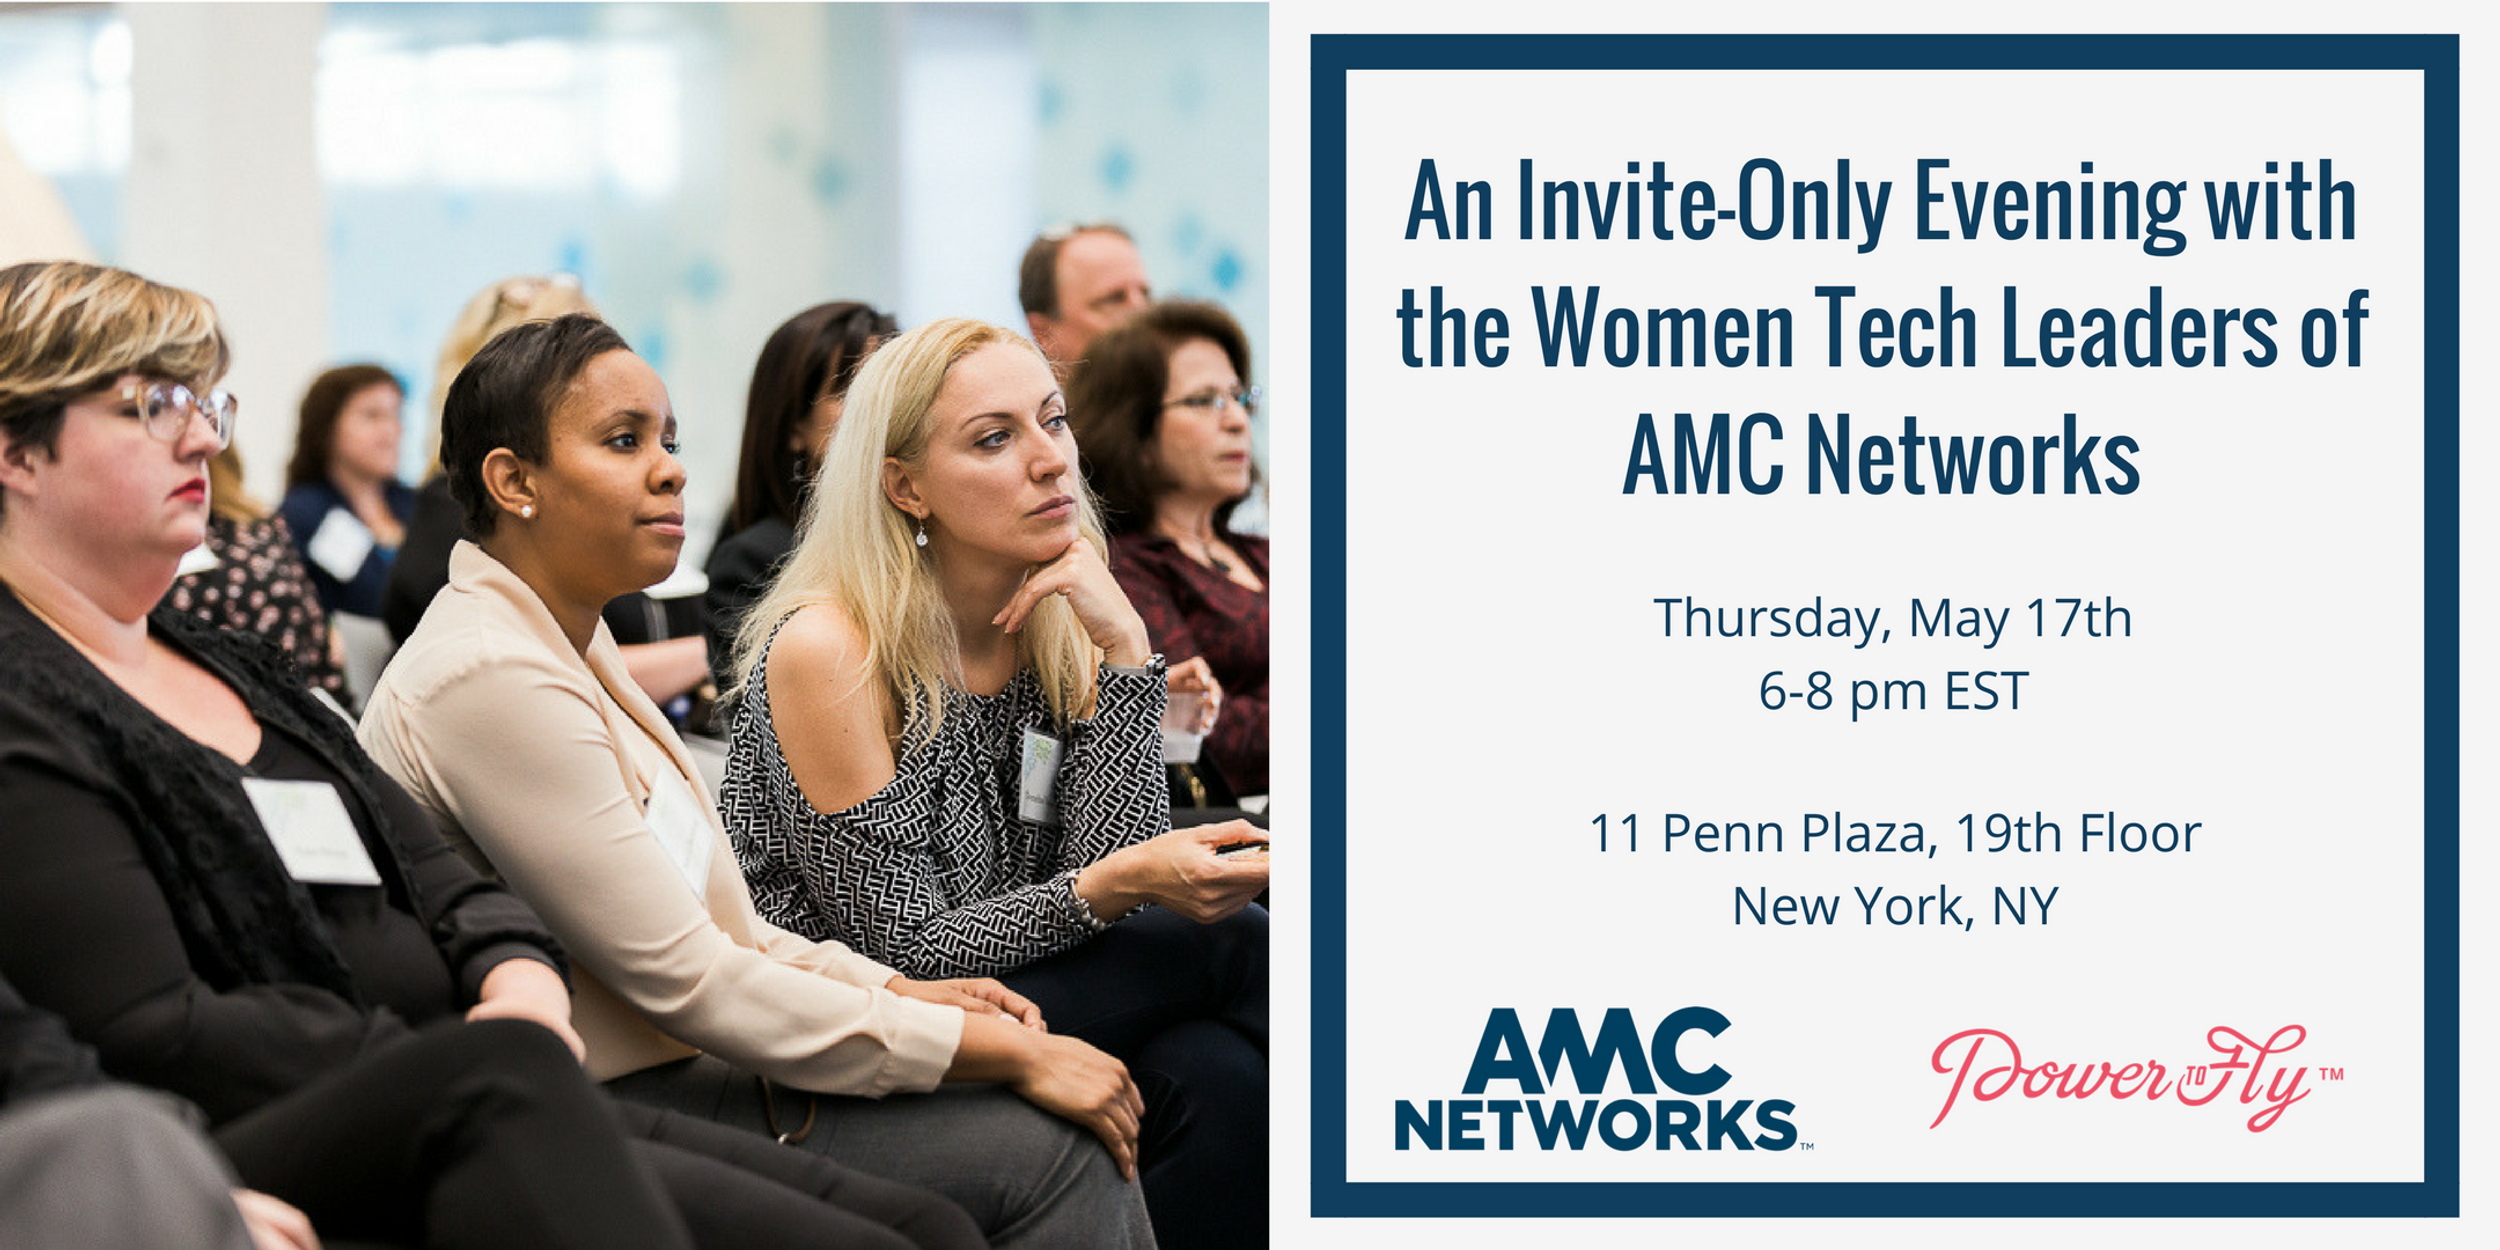 An Invite-Only Evening with Women Tech Leaders of AMC Networks